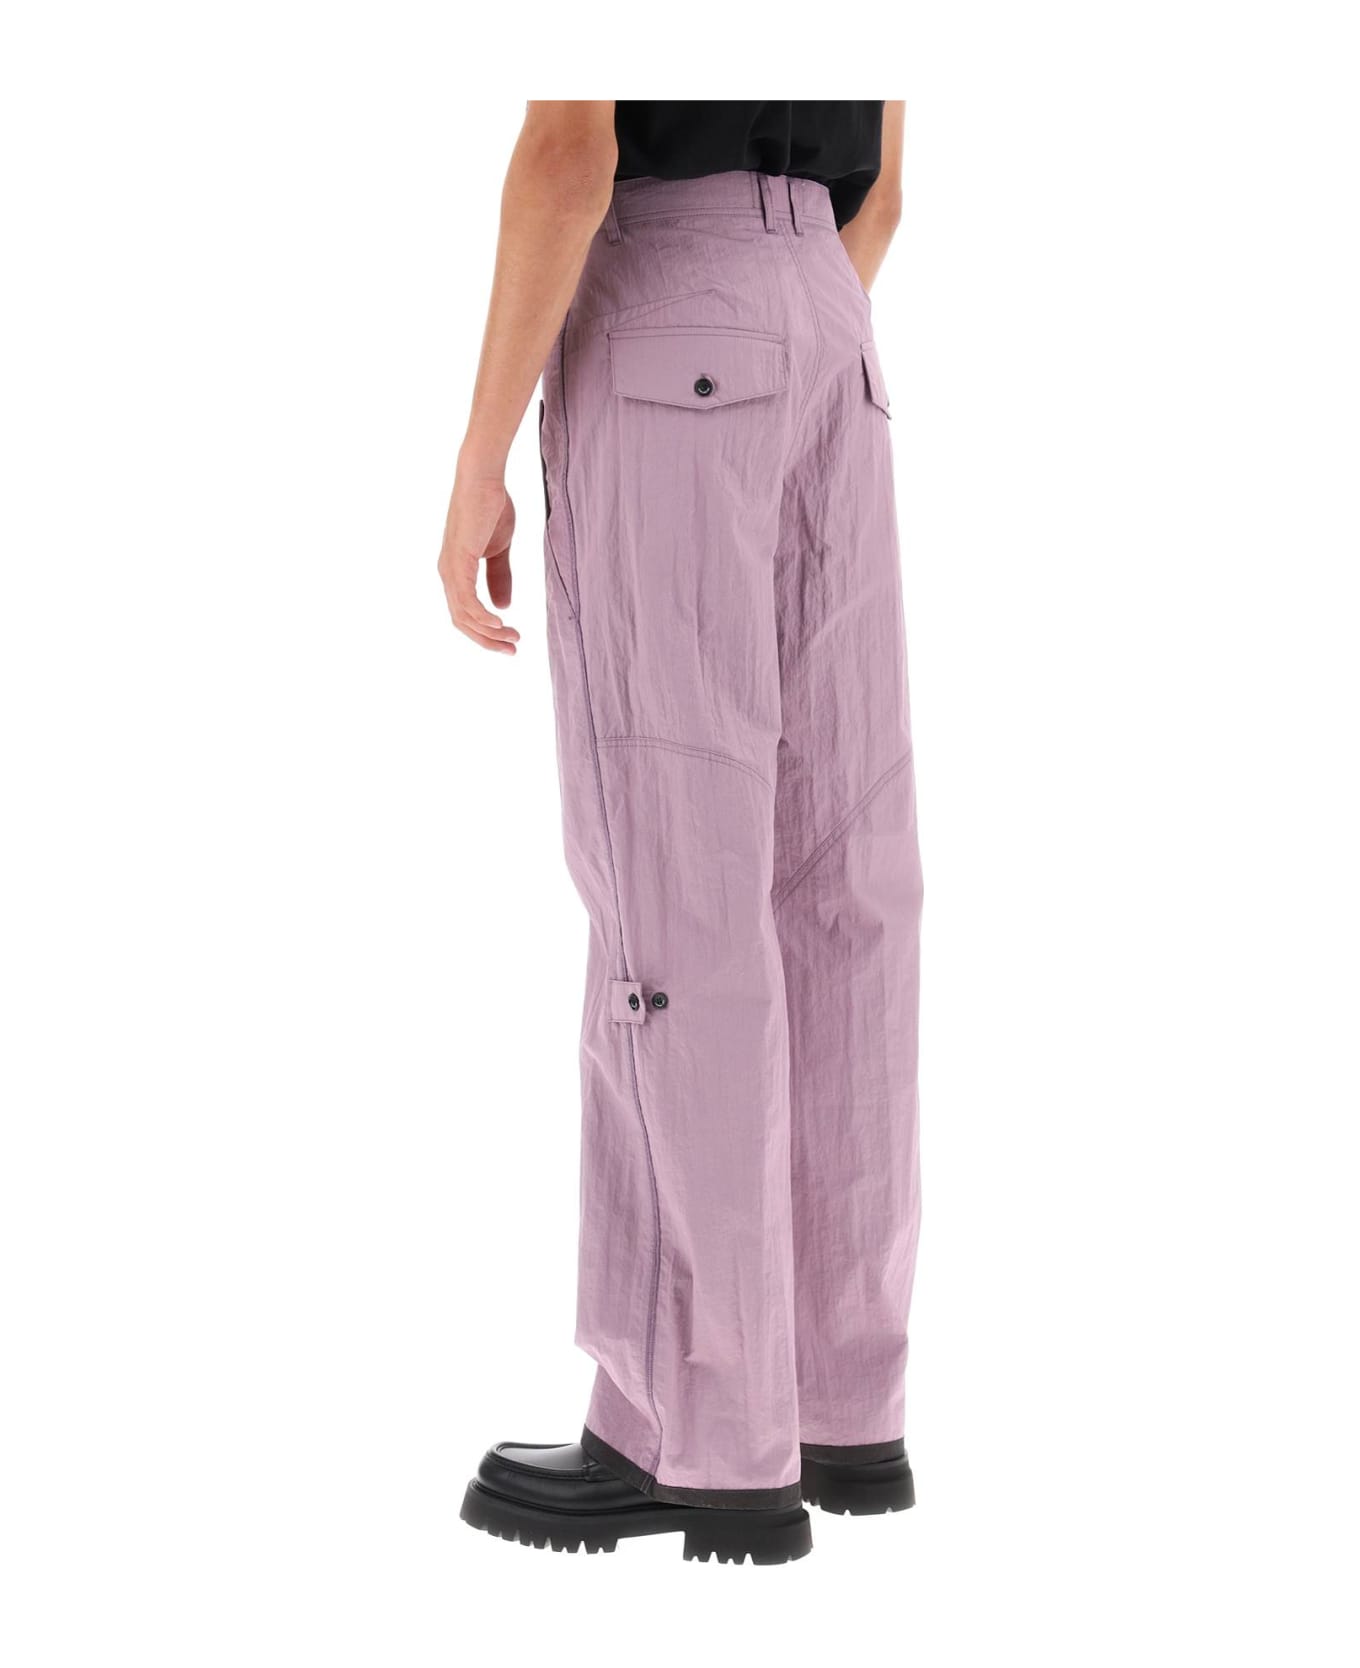 Andersson Bell Inside-out Technical Pants - PURPLE (Purple)